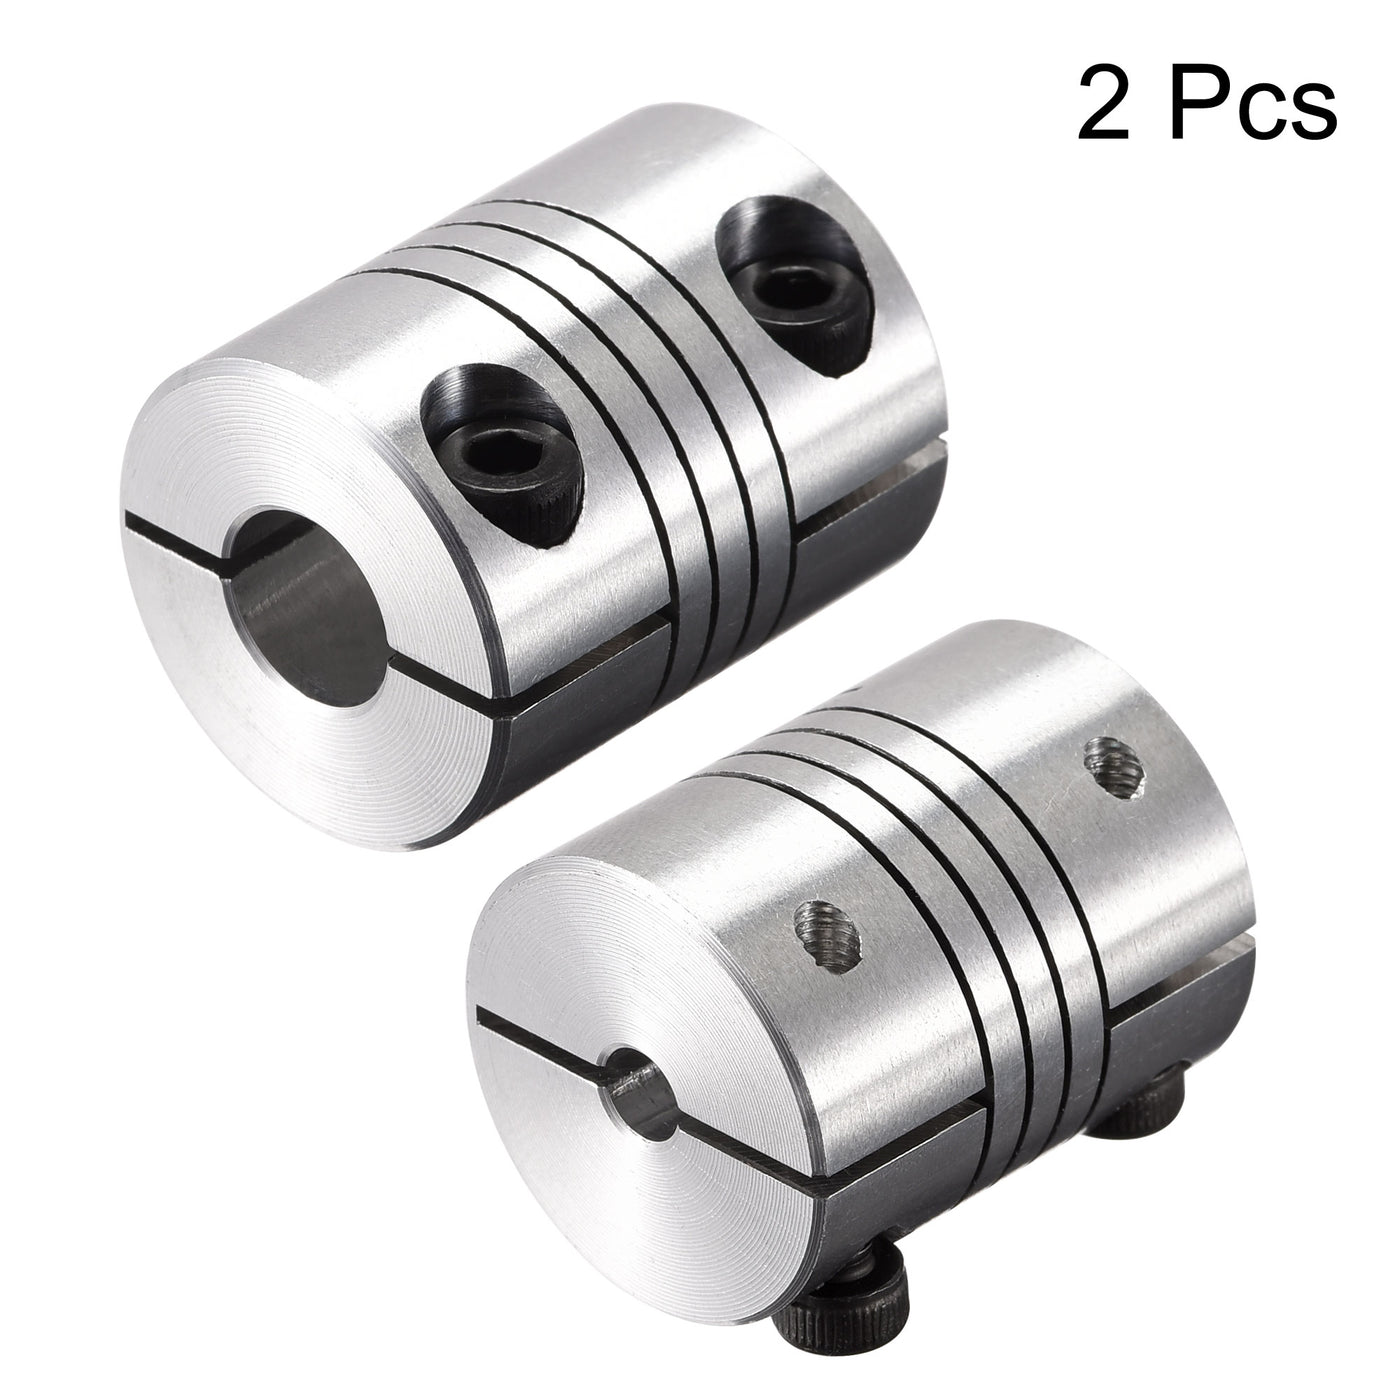 uxcell Uxcell 2PCS Motor Shaft 4mm to 8mm Helical Beam Coupler Coupling 20mm Dia 25mm Length